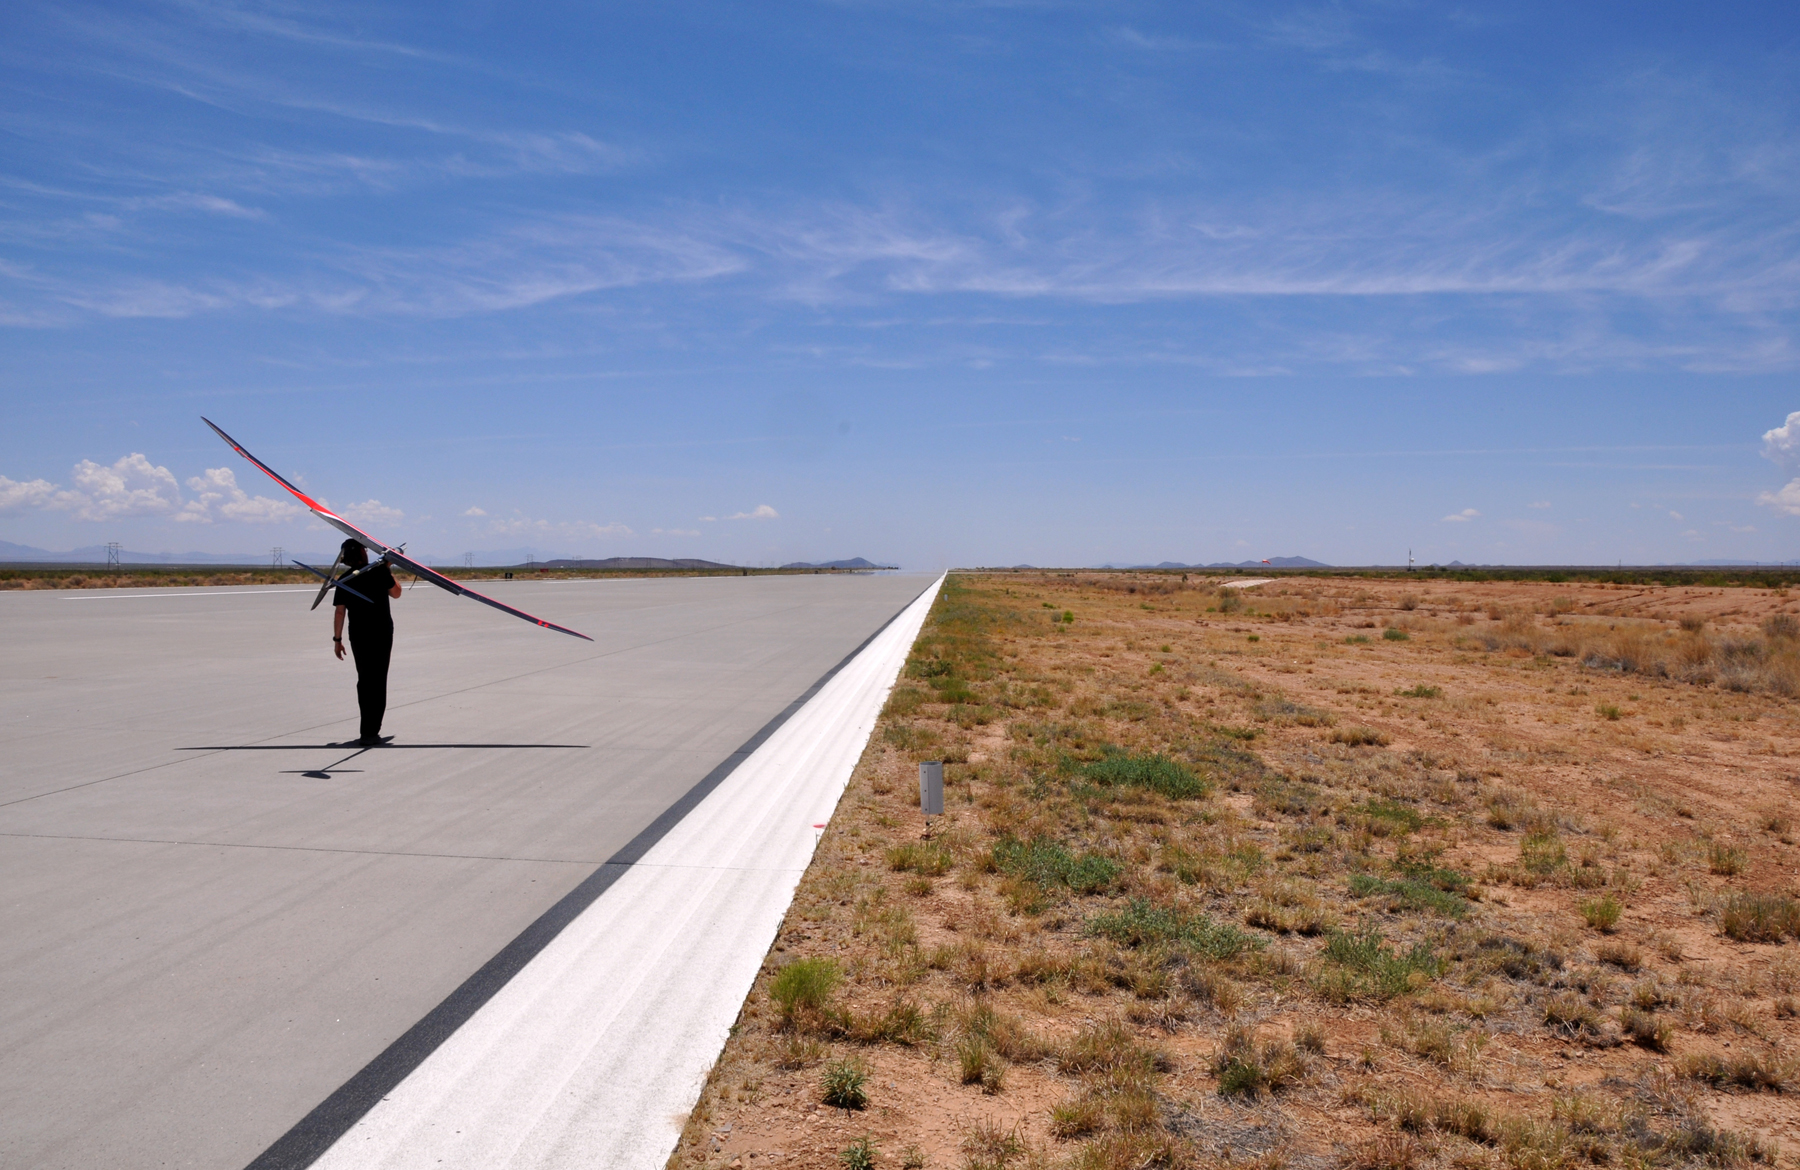 Stratodynamics CEO Gary Pundsack carries the HiDRON glider off the runway at Spaceport America